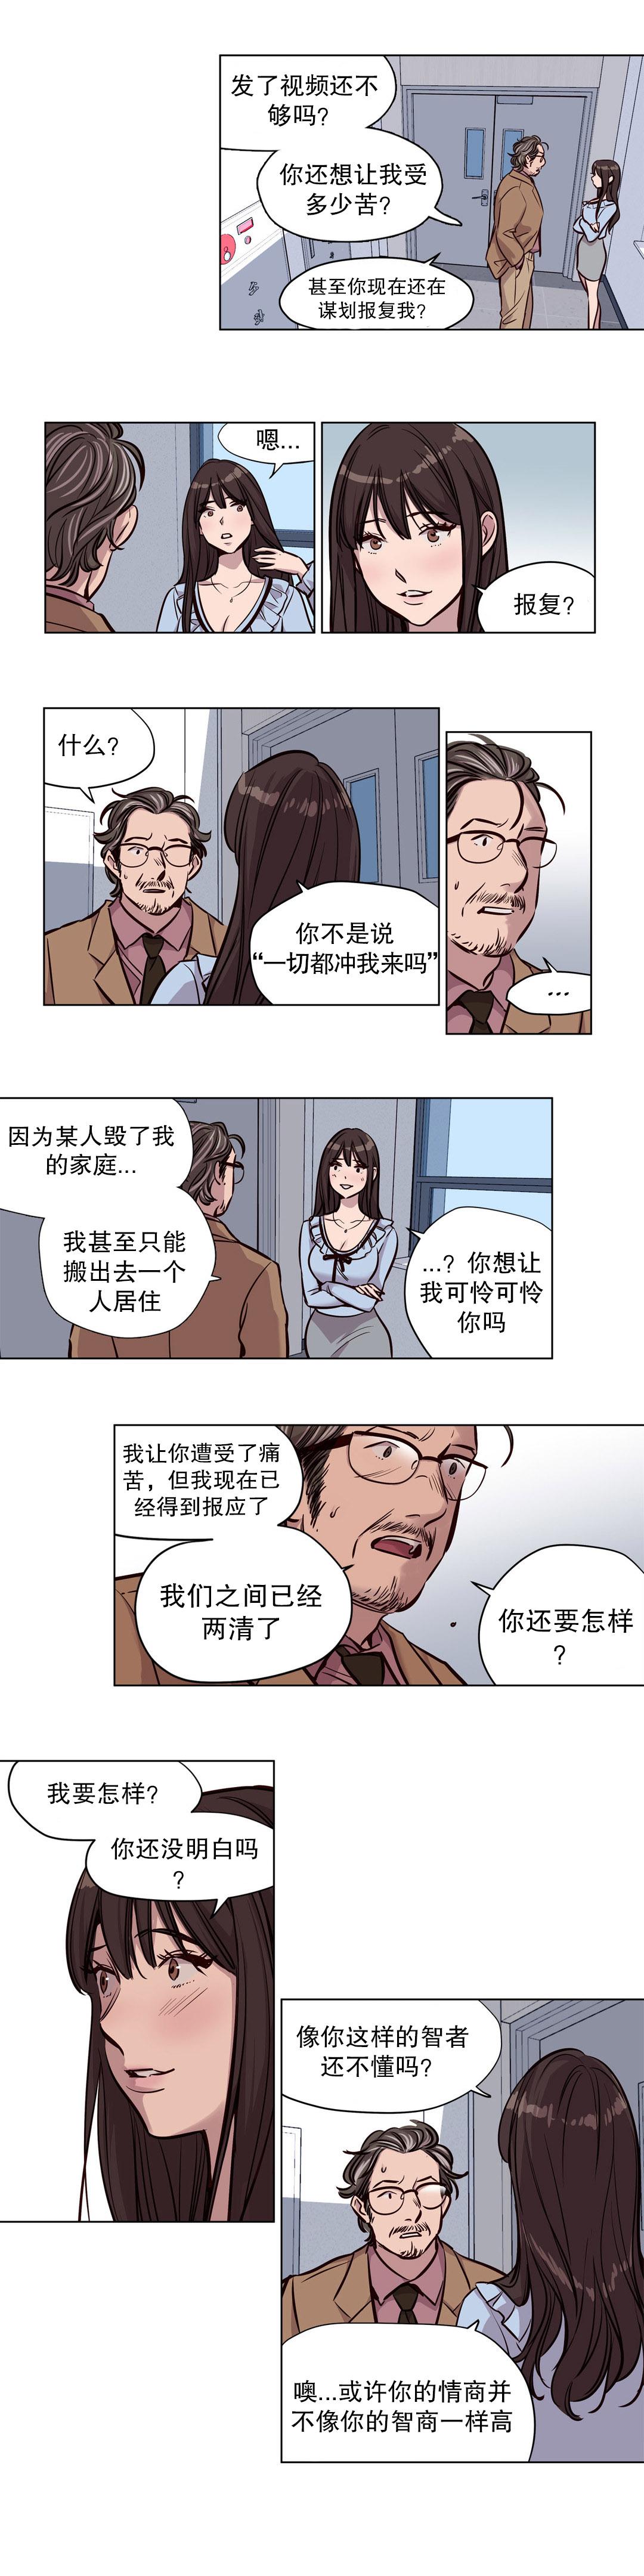 Gay Bang [Ramjak] 赎罪营(Atonement Camp) Ch.50-52 (Chinese) Brother Sister - Page 10